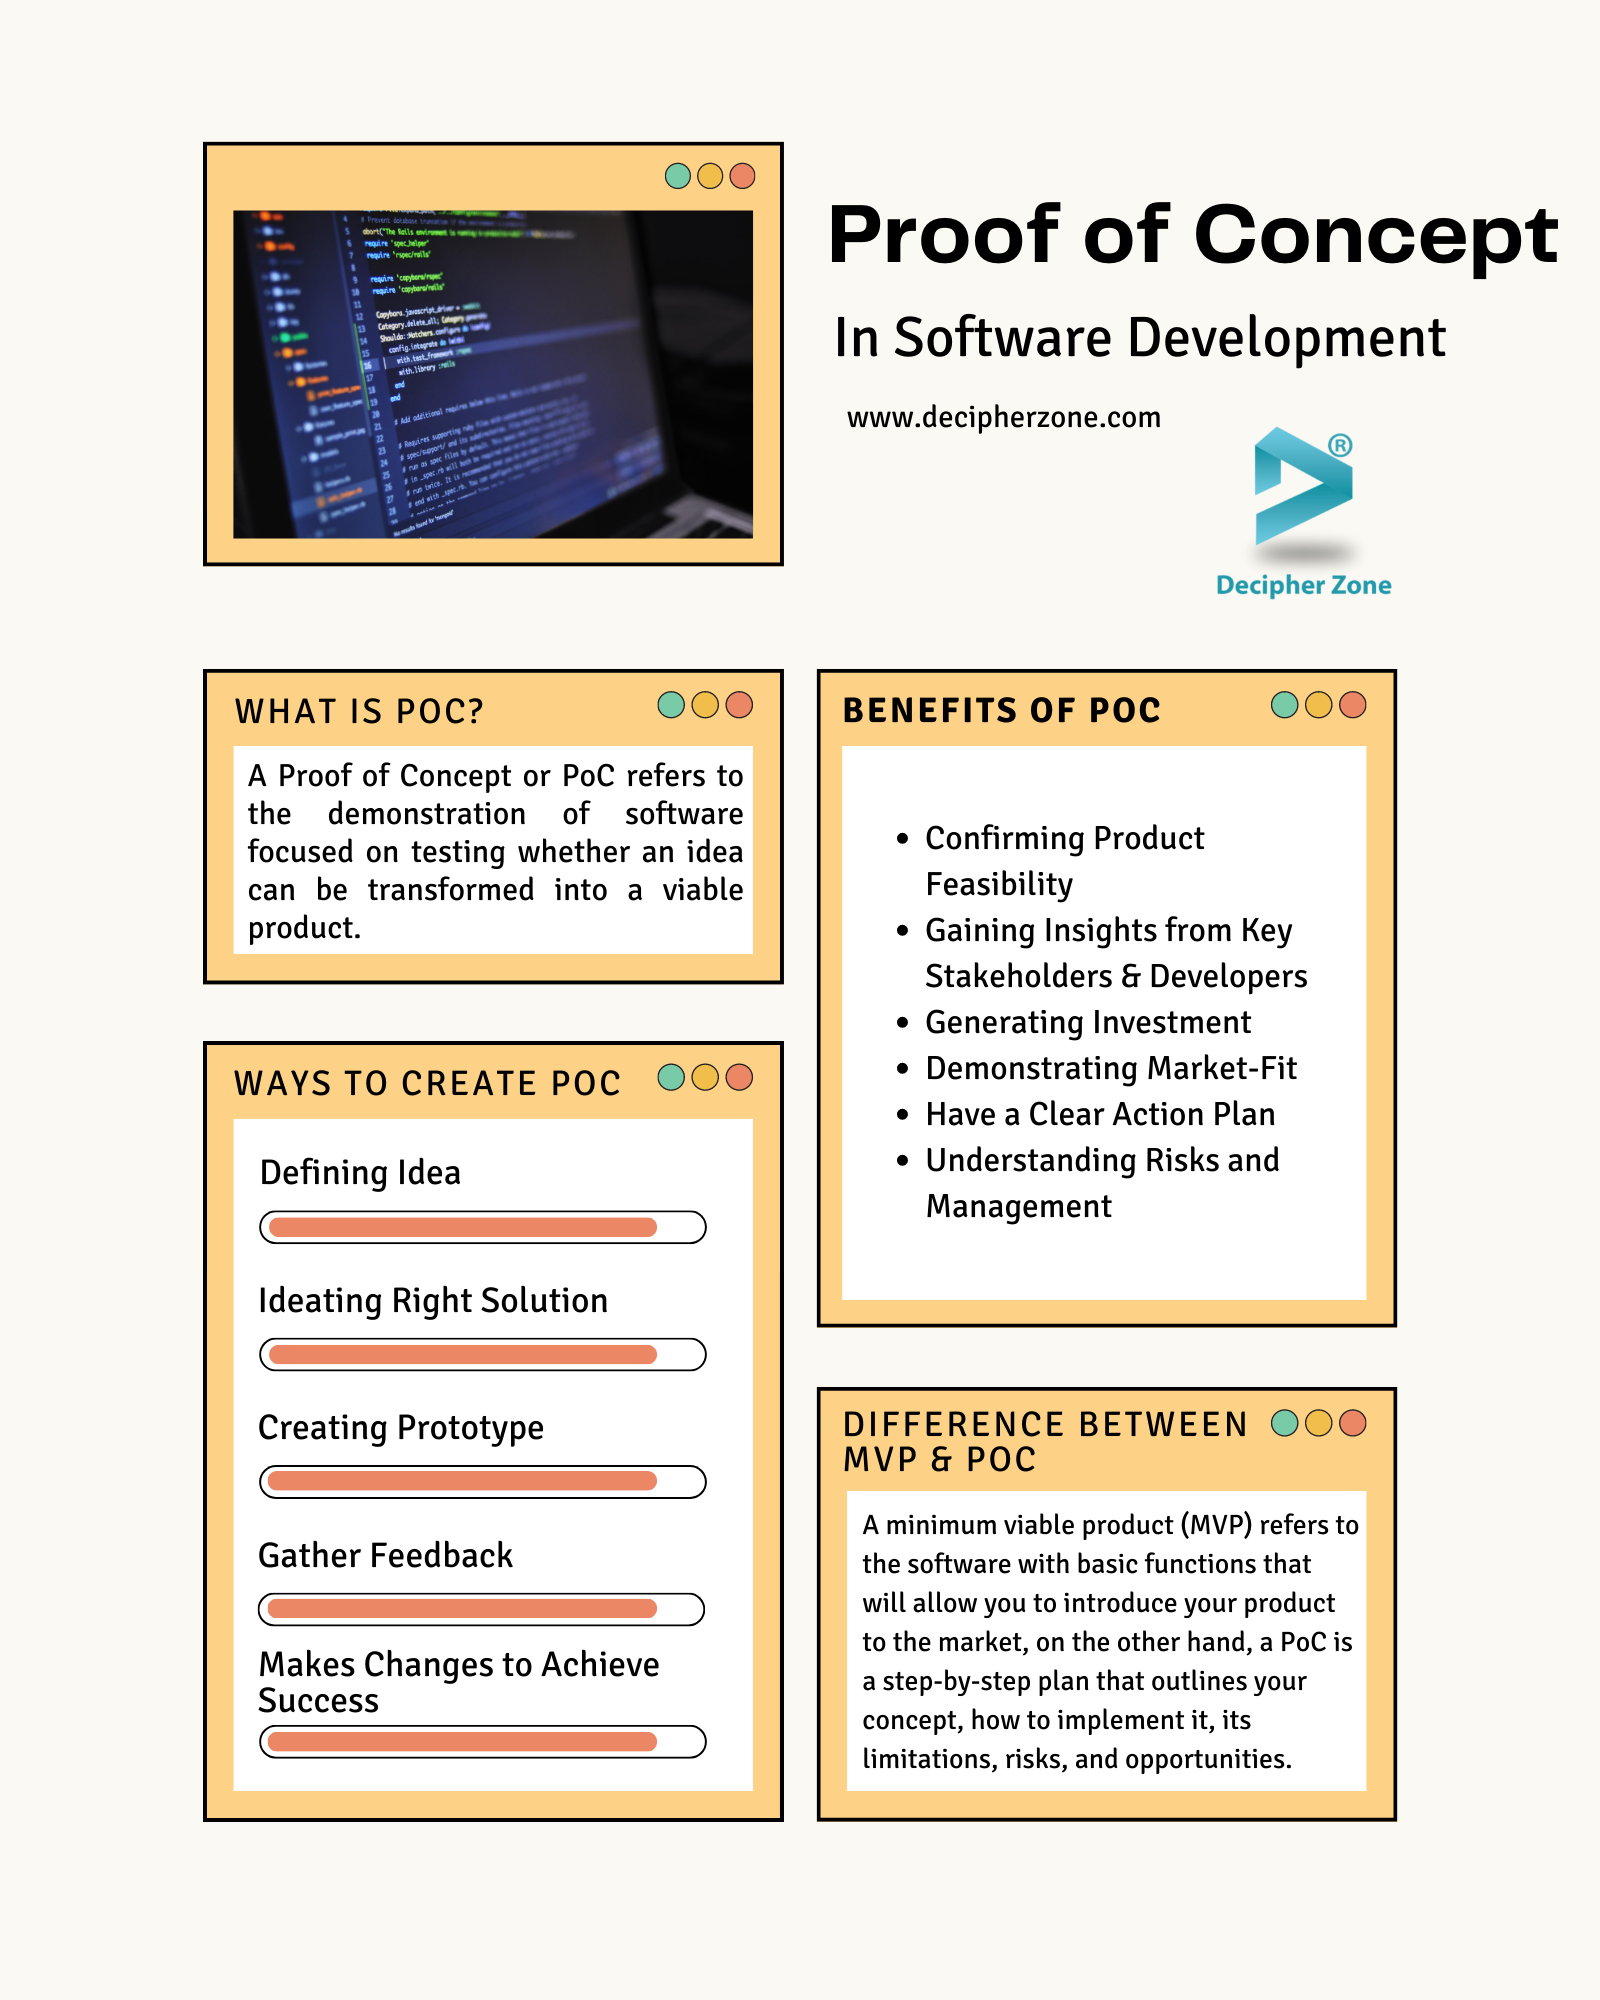 Proof of Concept in Software Development